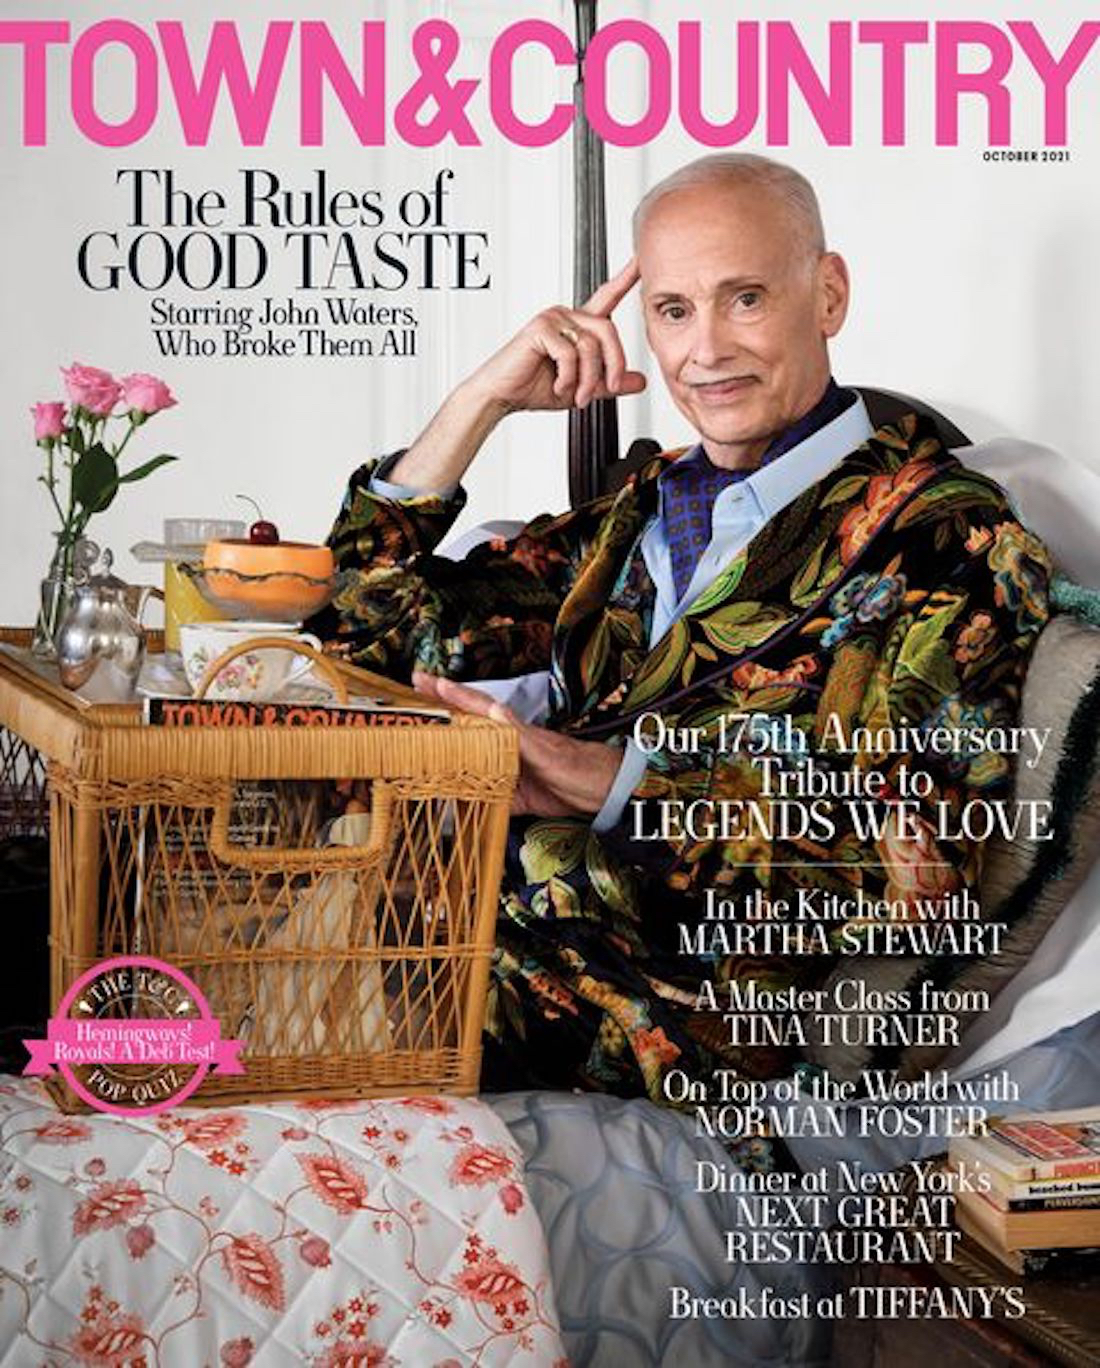 Town & Country magazine cover with John Waters